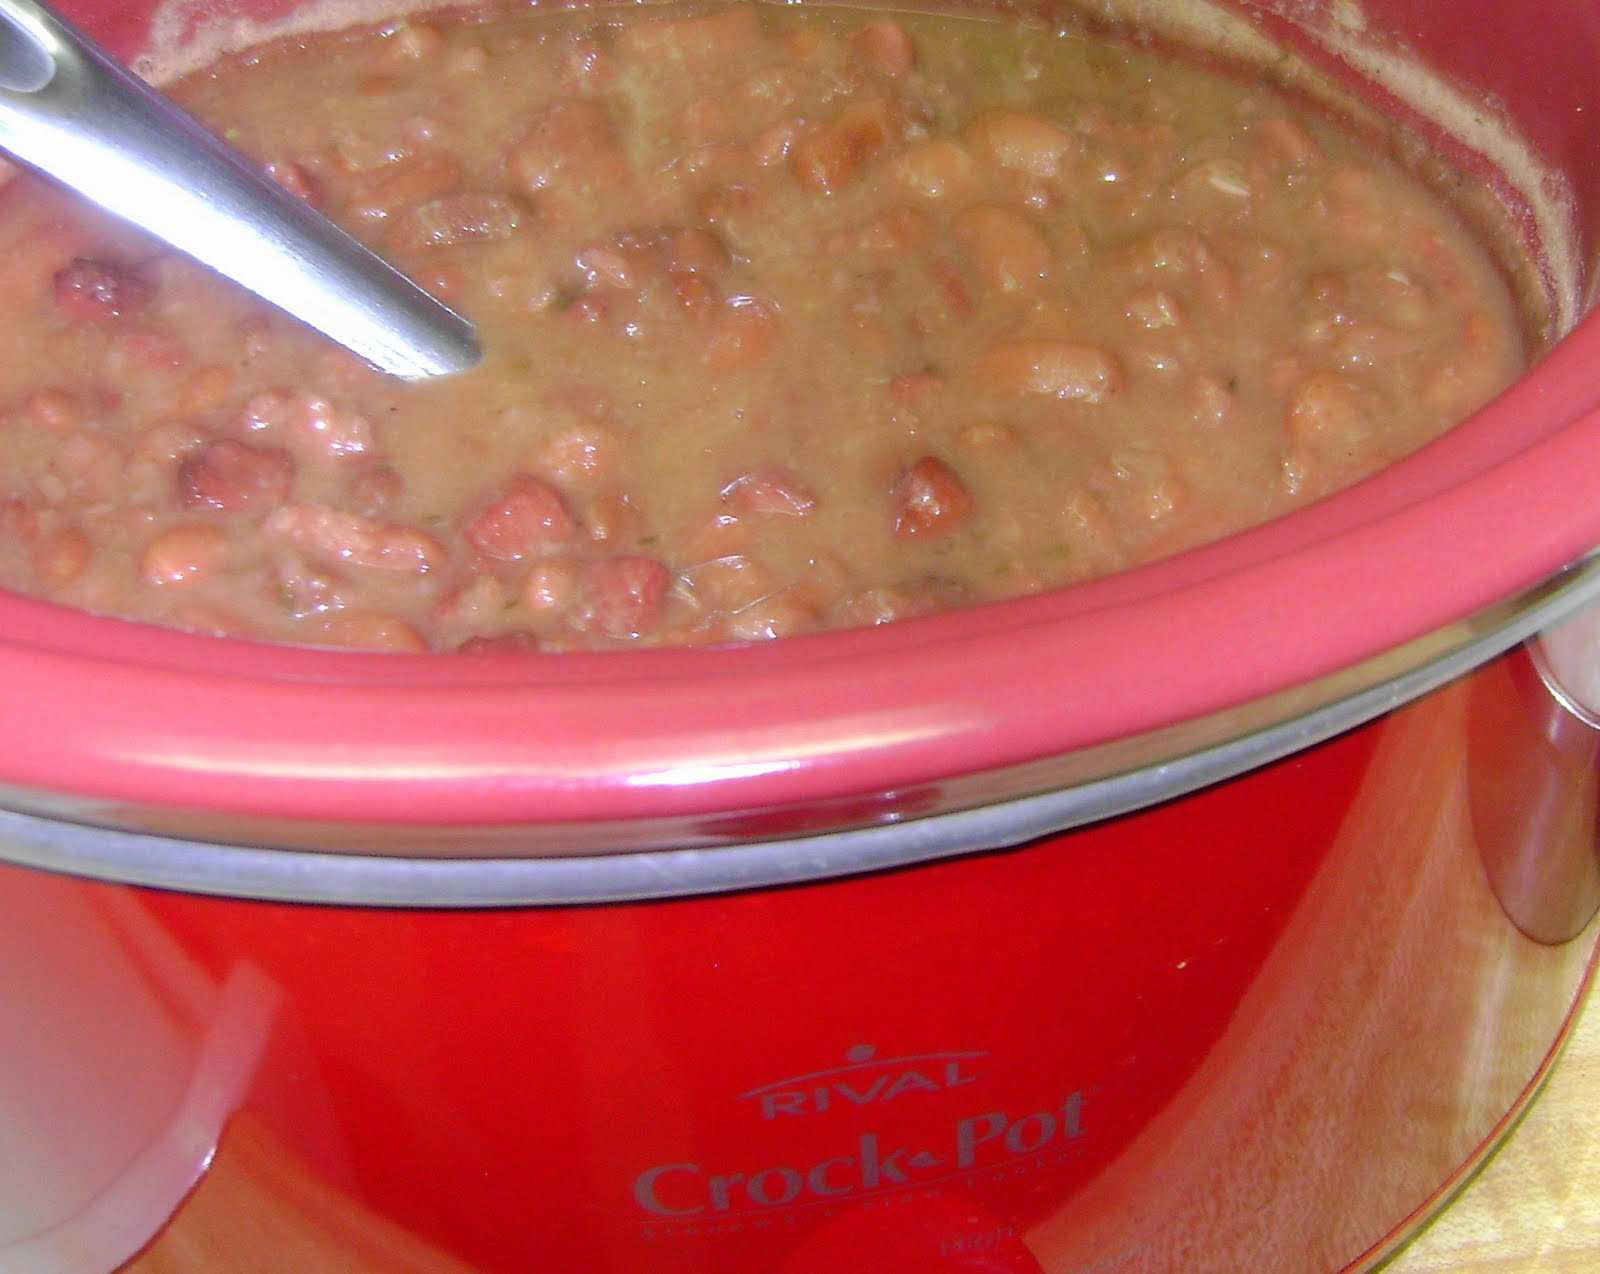 Red Beans And Rice Recipe Slow Cooker
 Cajun Delights Slow Cooker Red Beans & Rice Bayou Boogie